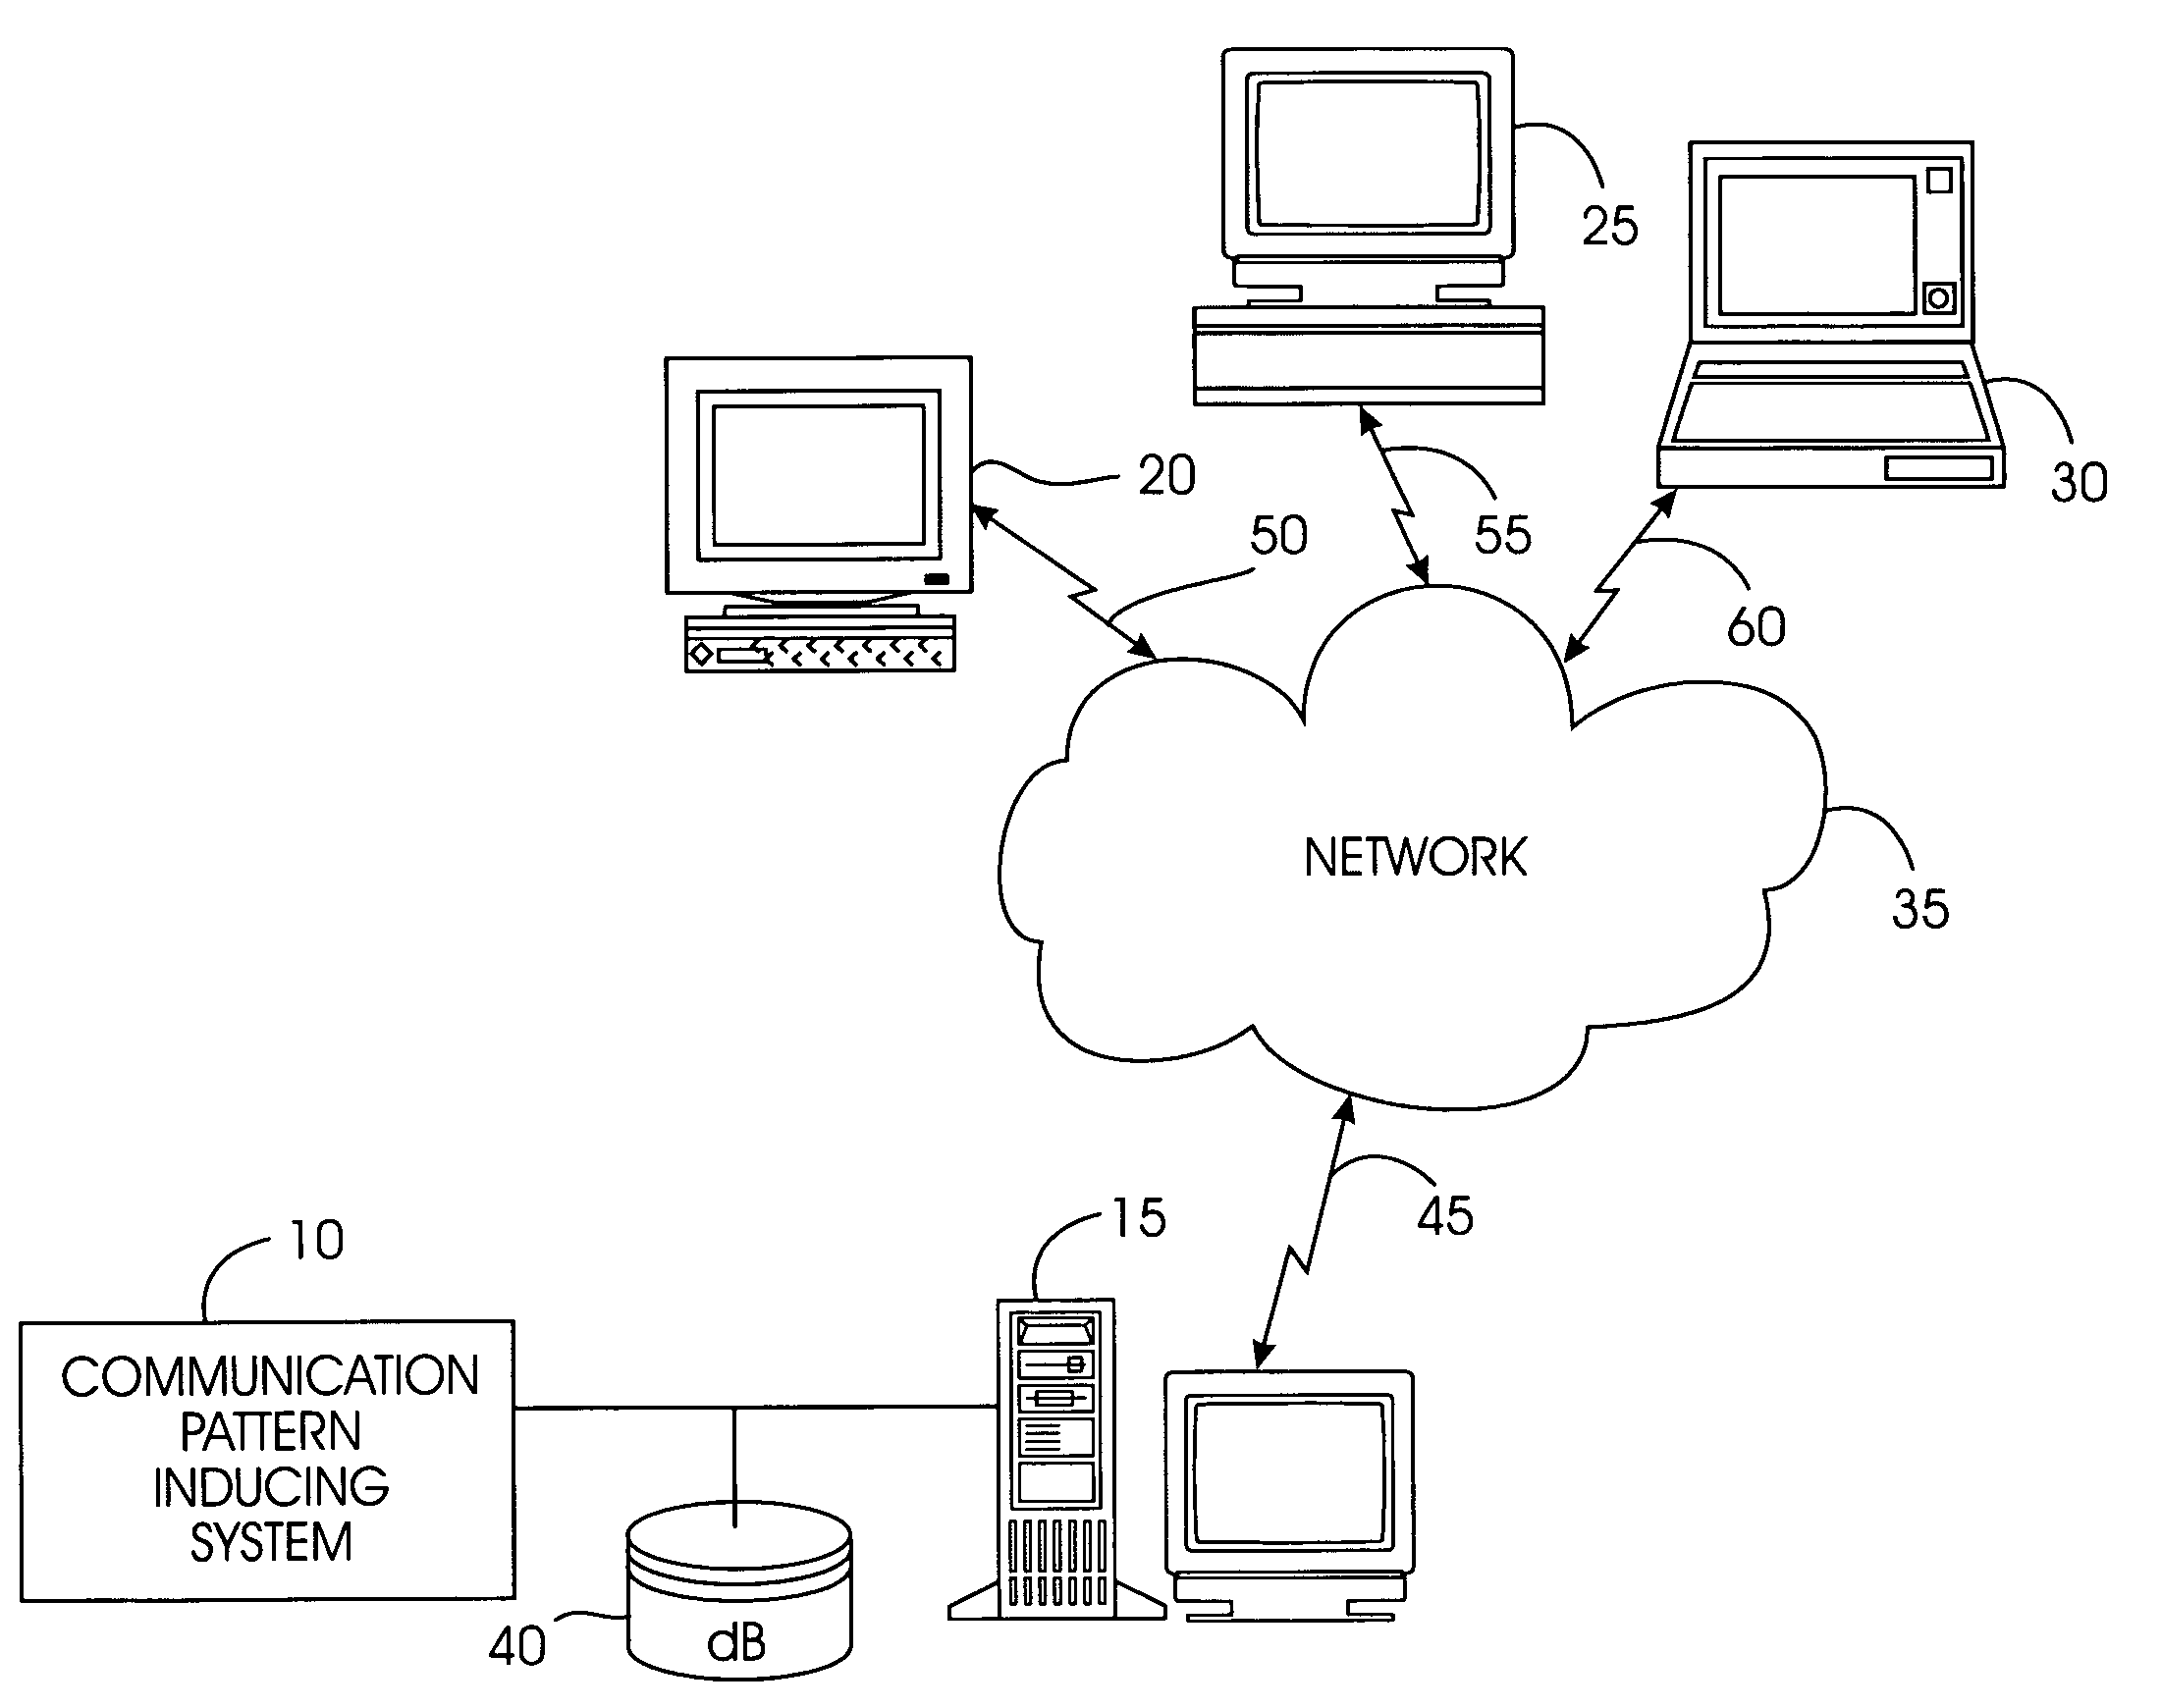 System, method, and service for inducing a pattern of communication among various parties